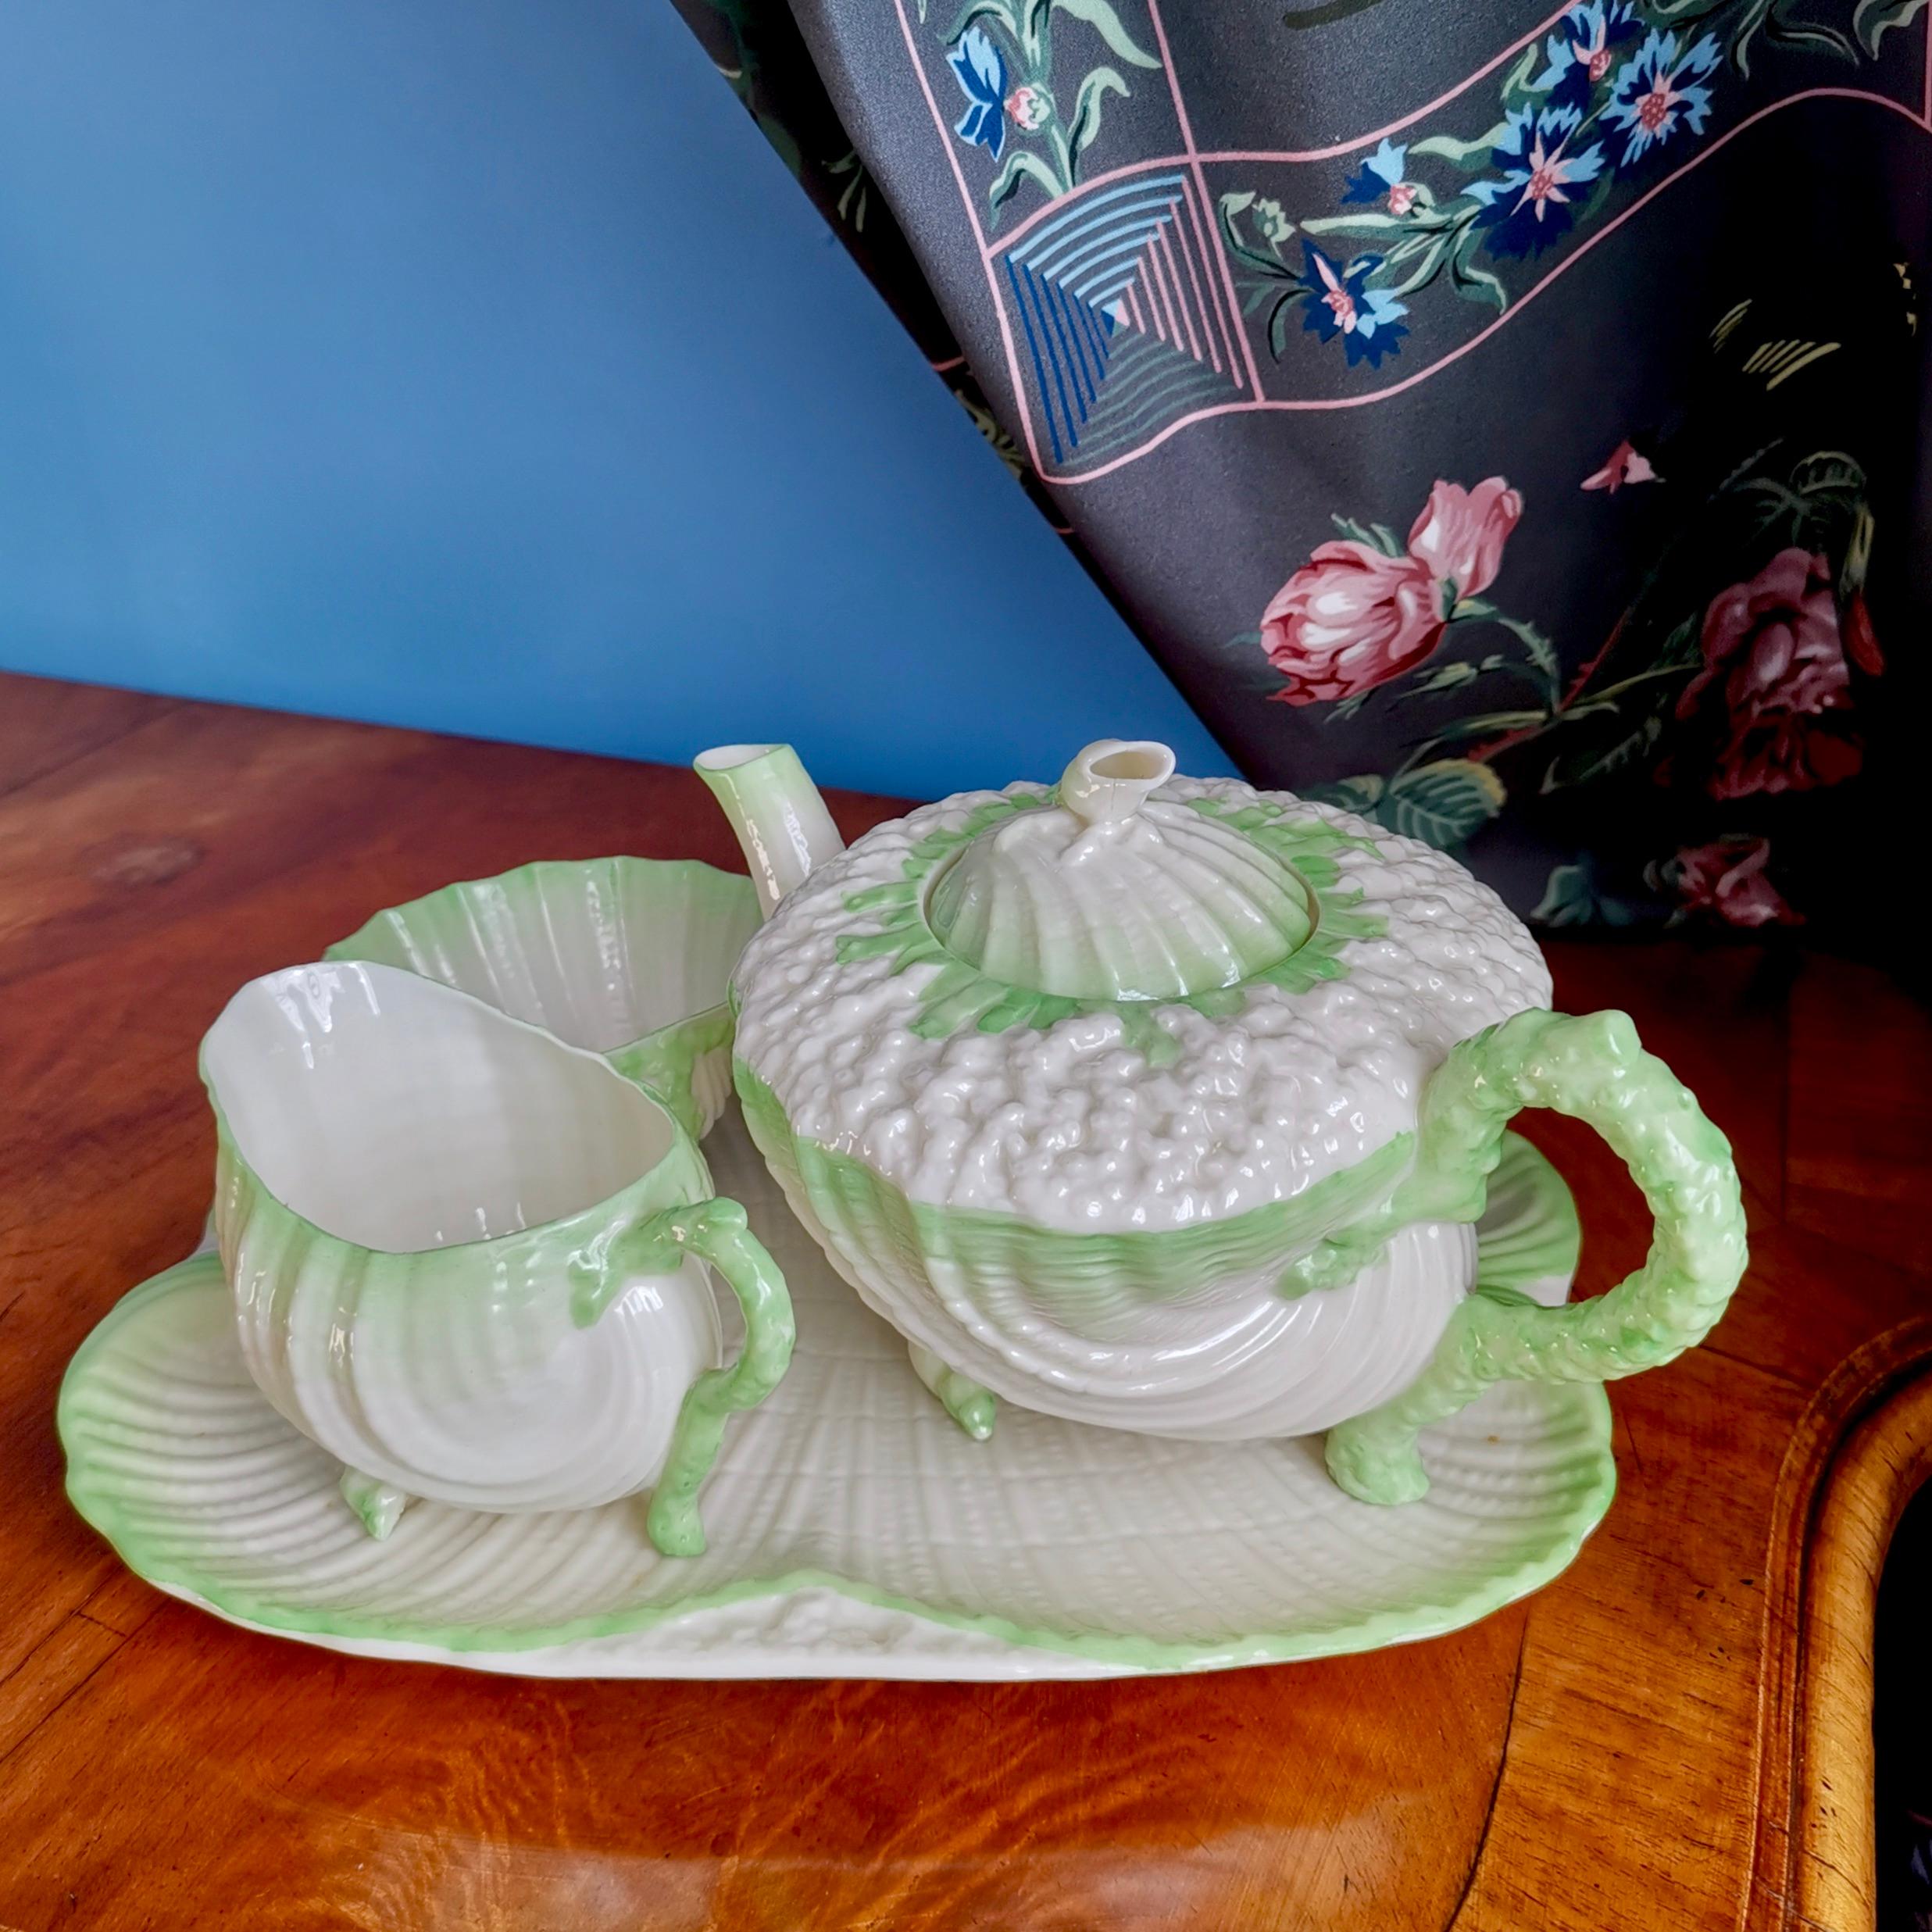 This is a rare and gorgeous Belleek cabaret teapot set in the green Neptune design, consisting of a teapot, a milk jug and a sugar basin, all placed on a small tray. All items carry the 2nd black mark, which was used between 1891 and 1926.

If you